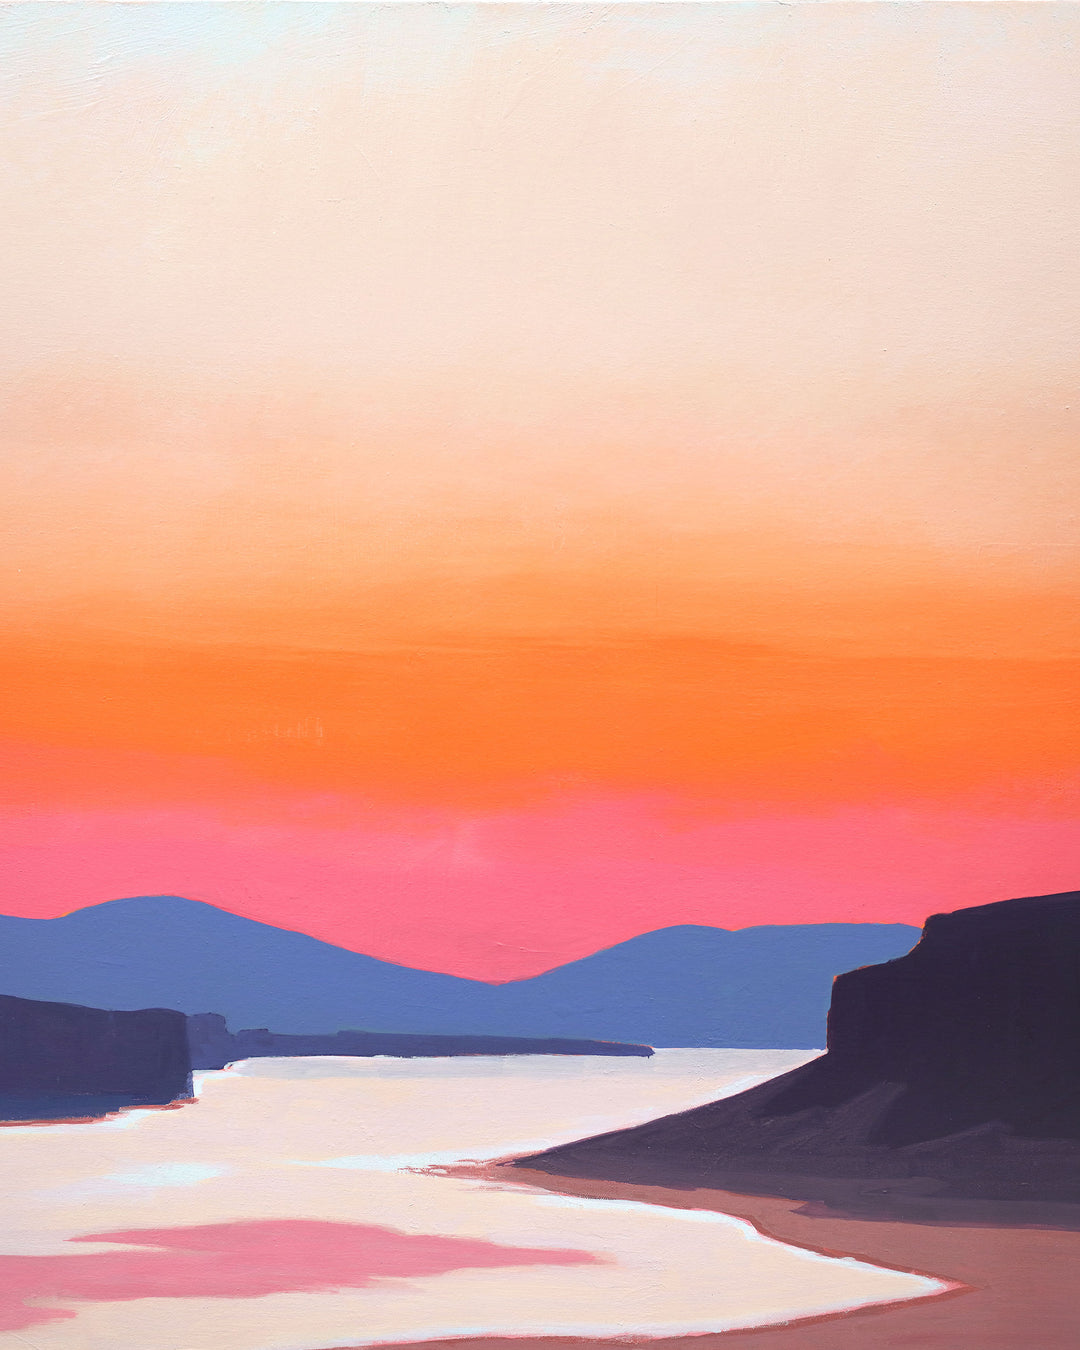 Abstract art print of a river gorge at sunset with pink and orange sky.